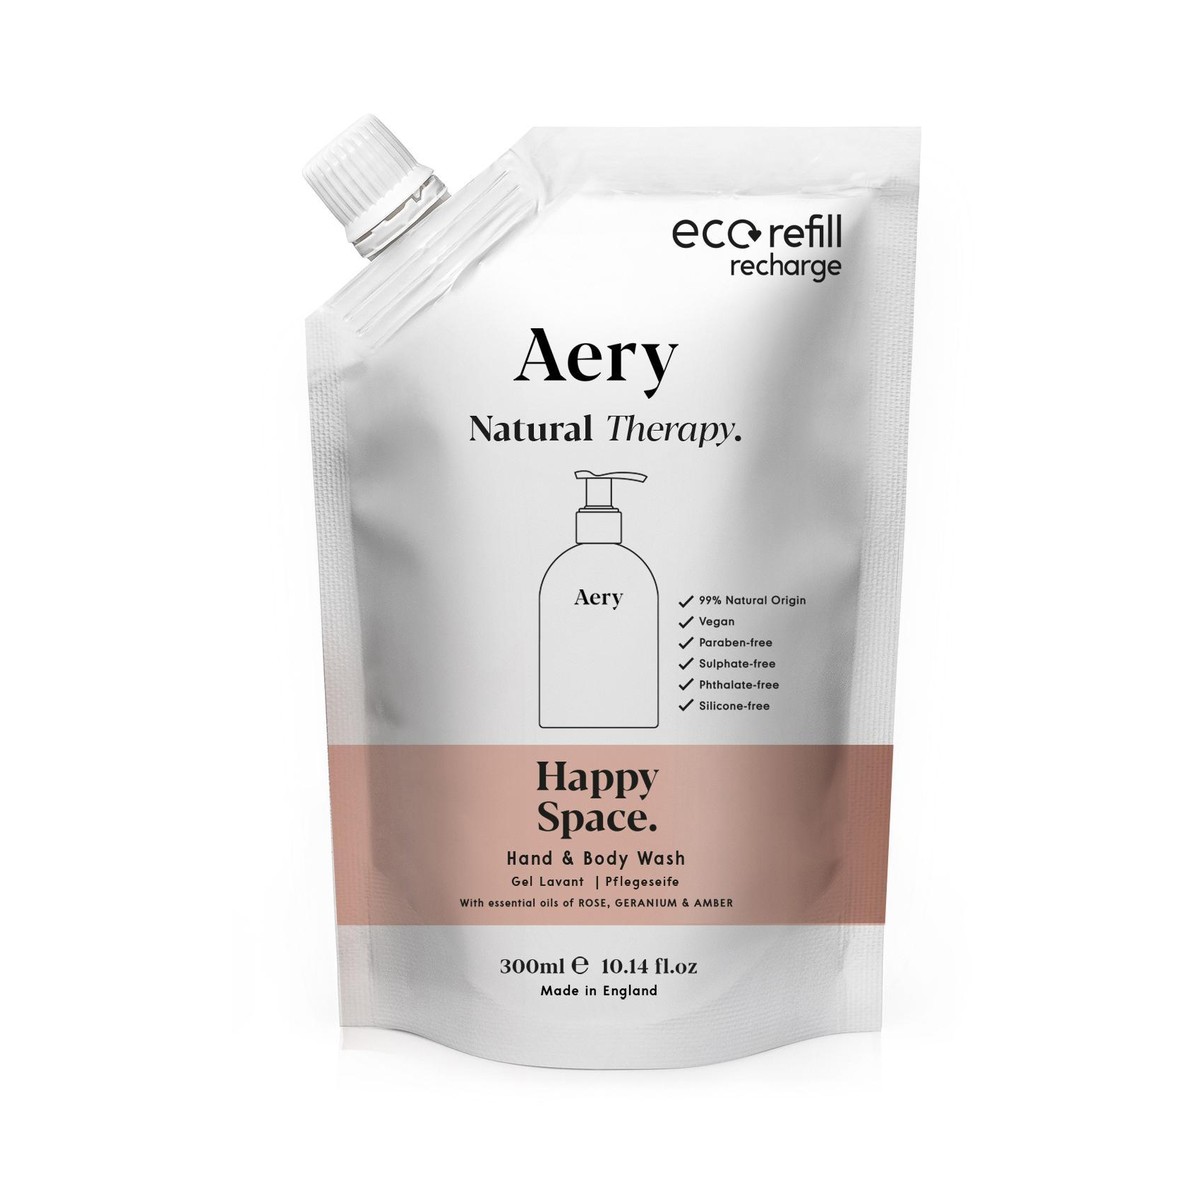  Aromatherapy Recharge Savon Happy Space mains & corps  300ml